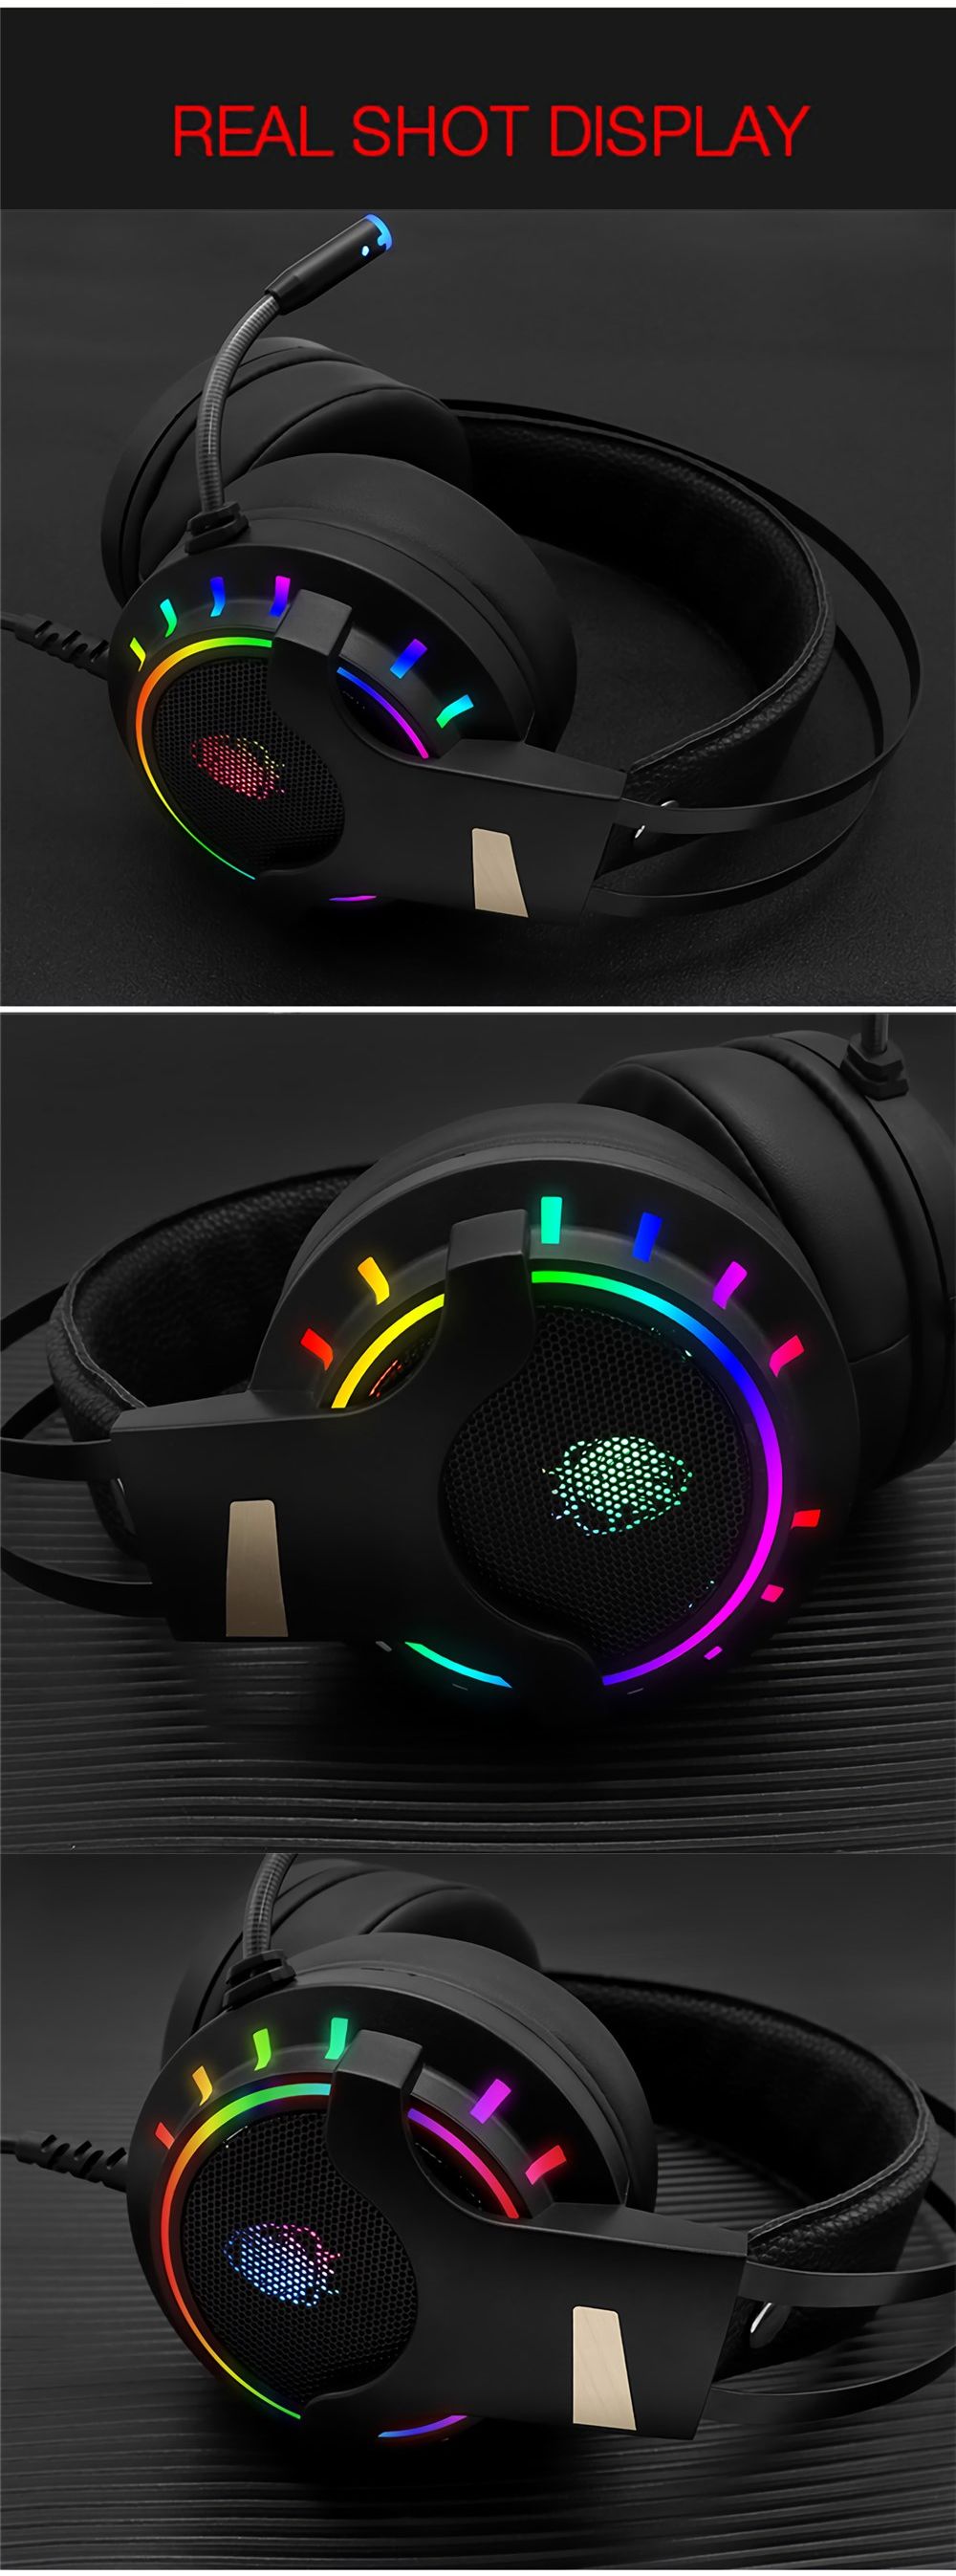 Tuner-K3-Game-Headphone-71-Channel-35mm-USB-Wired-Bass-RGB-Gaming-Headset-Stereo-Sound-Headset-with--1686843